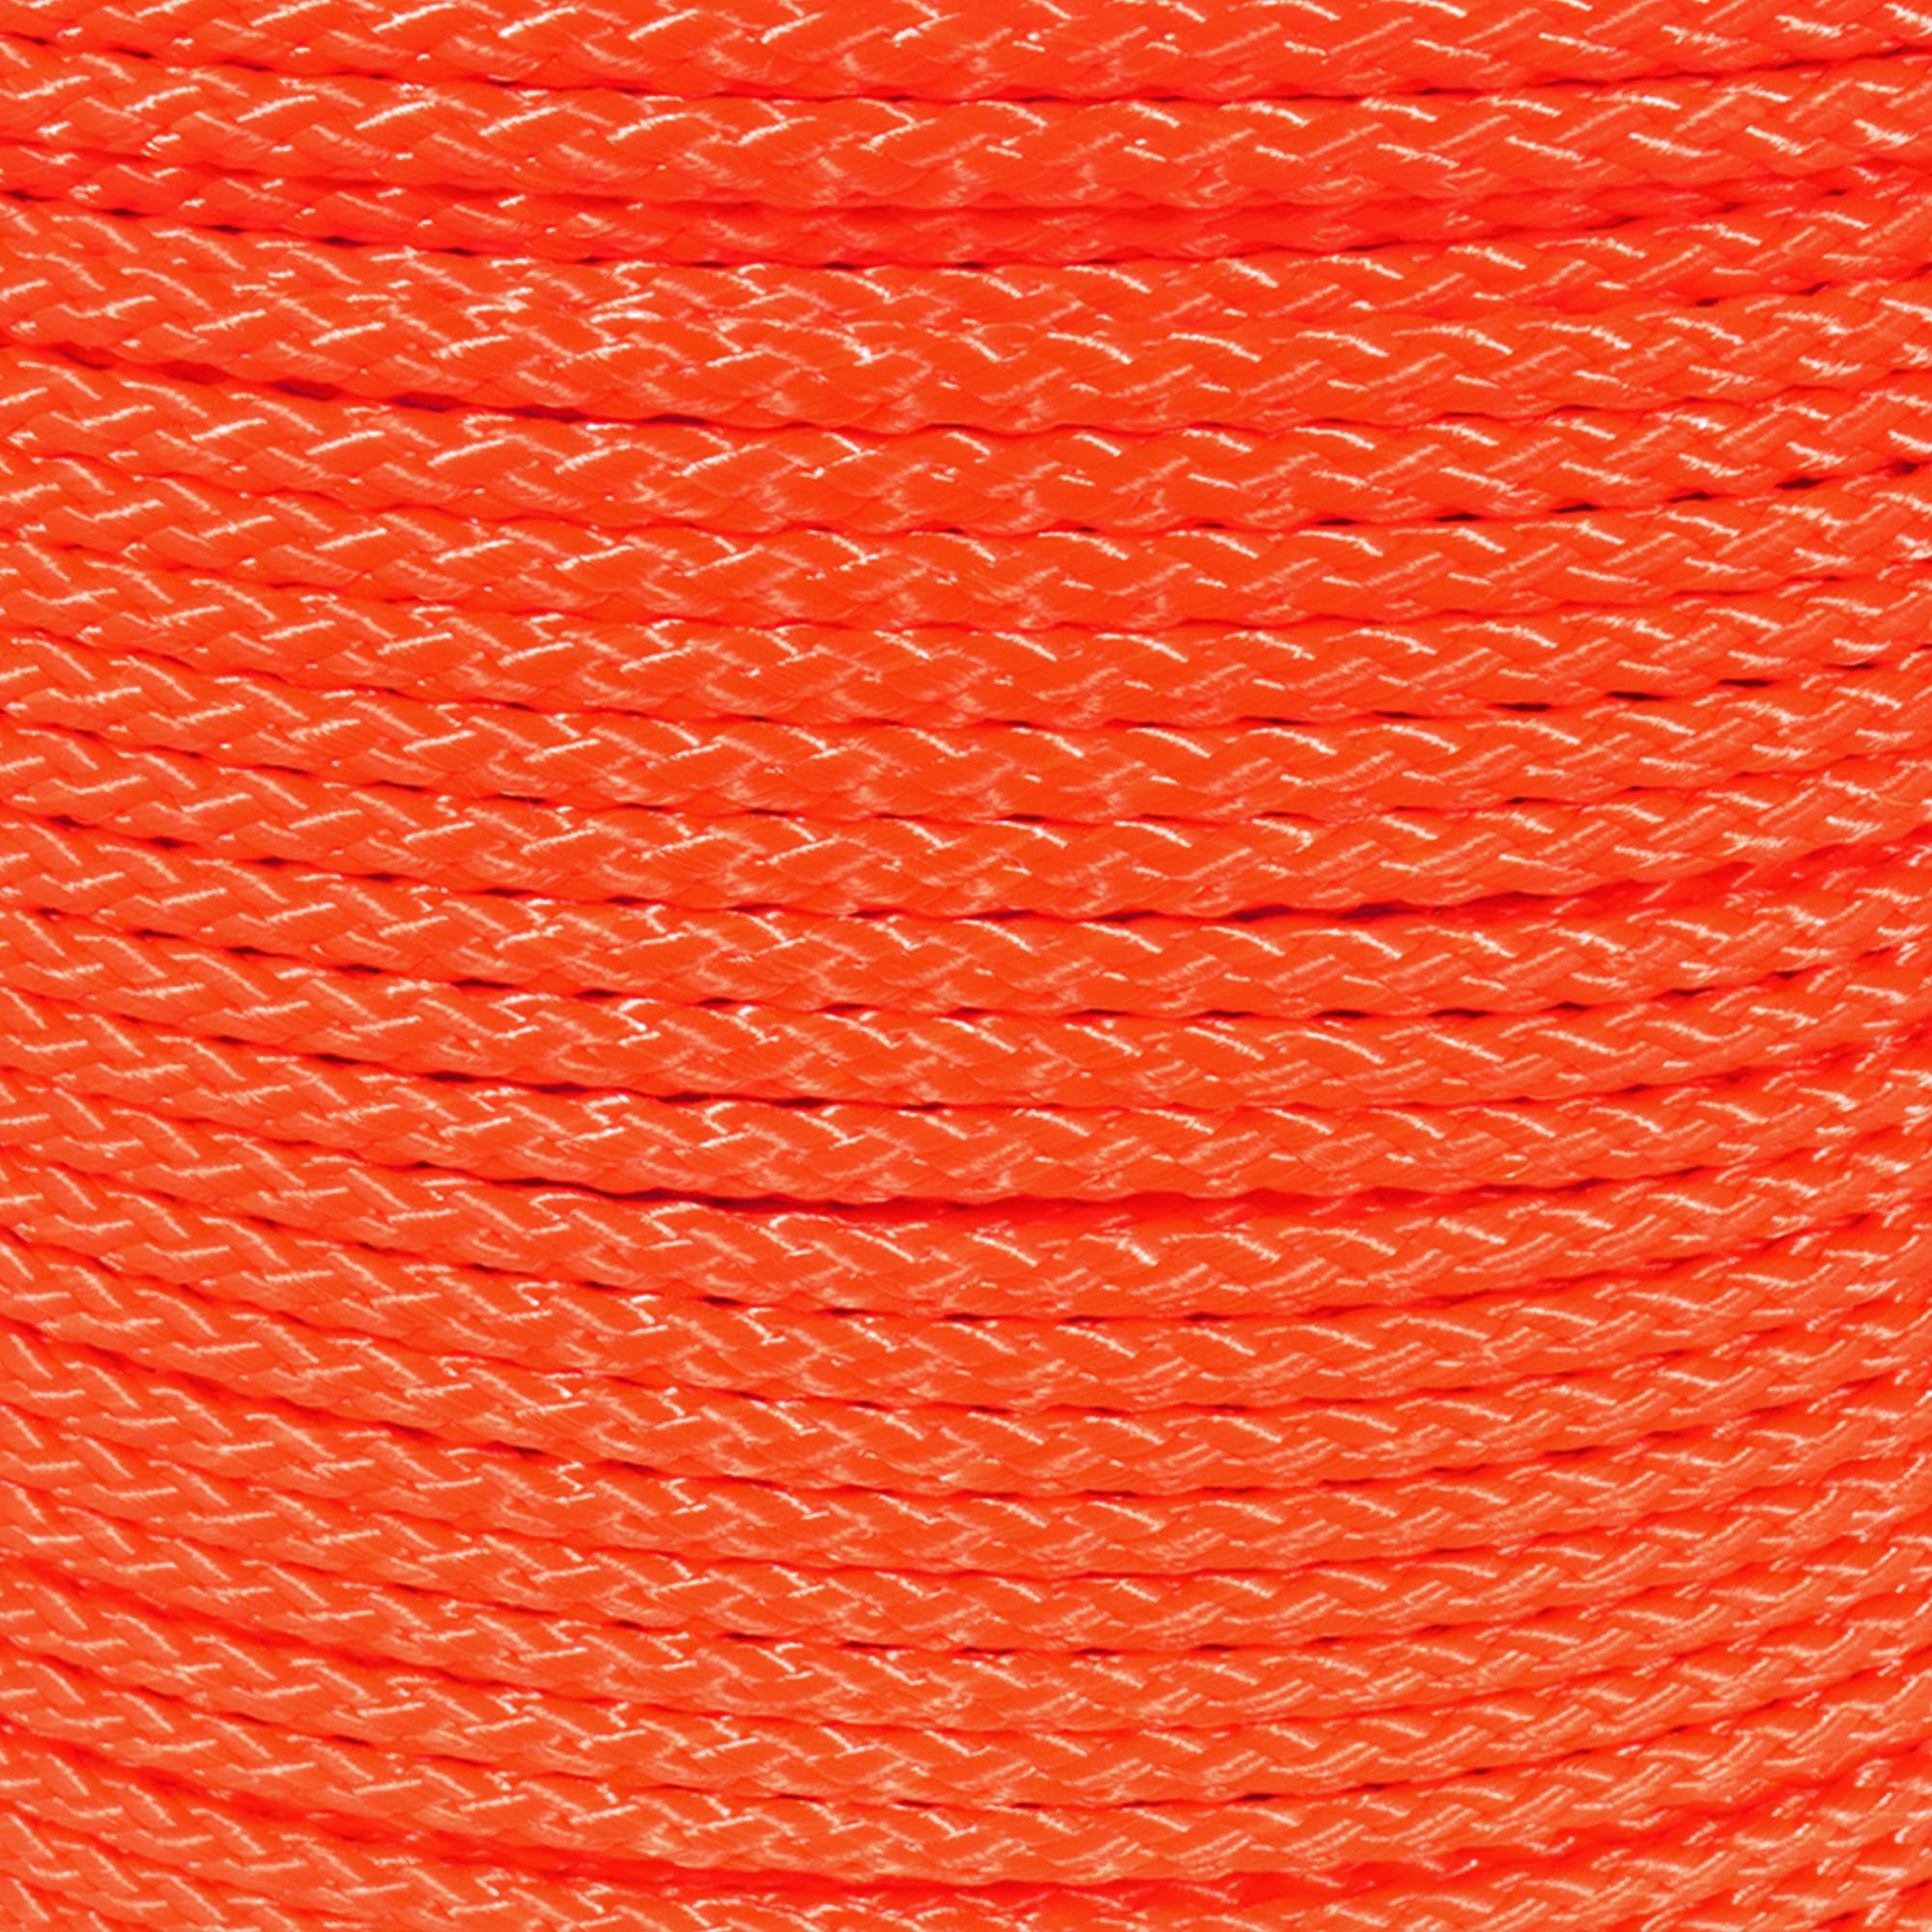 Nylon Rope,328feet/100m 2mm-6mm Diamond Braided Nylon Rope,All Purpose  Polypropylene General Purpose Utility Cord Flagline Rope for Sports and